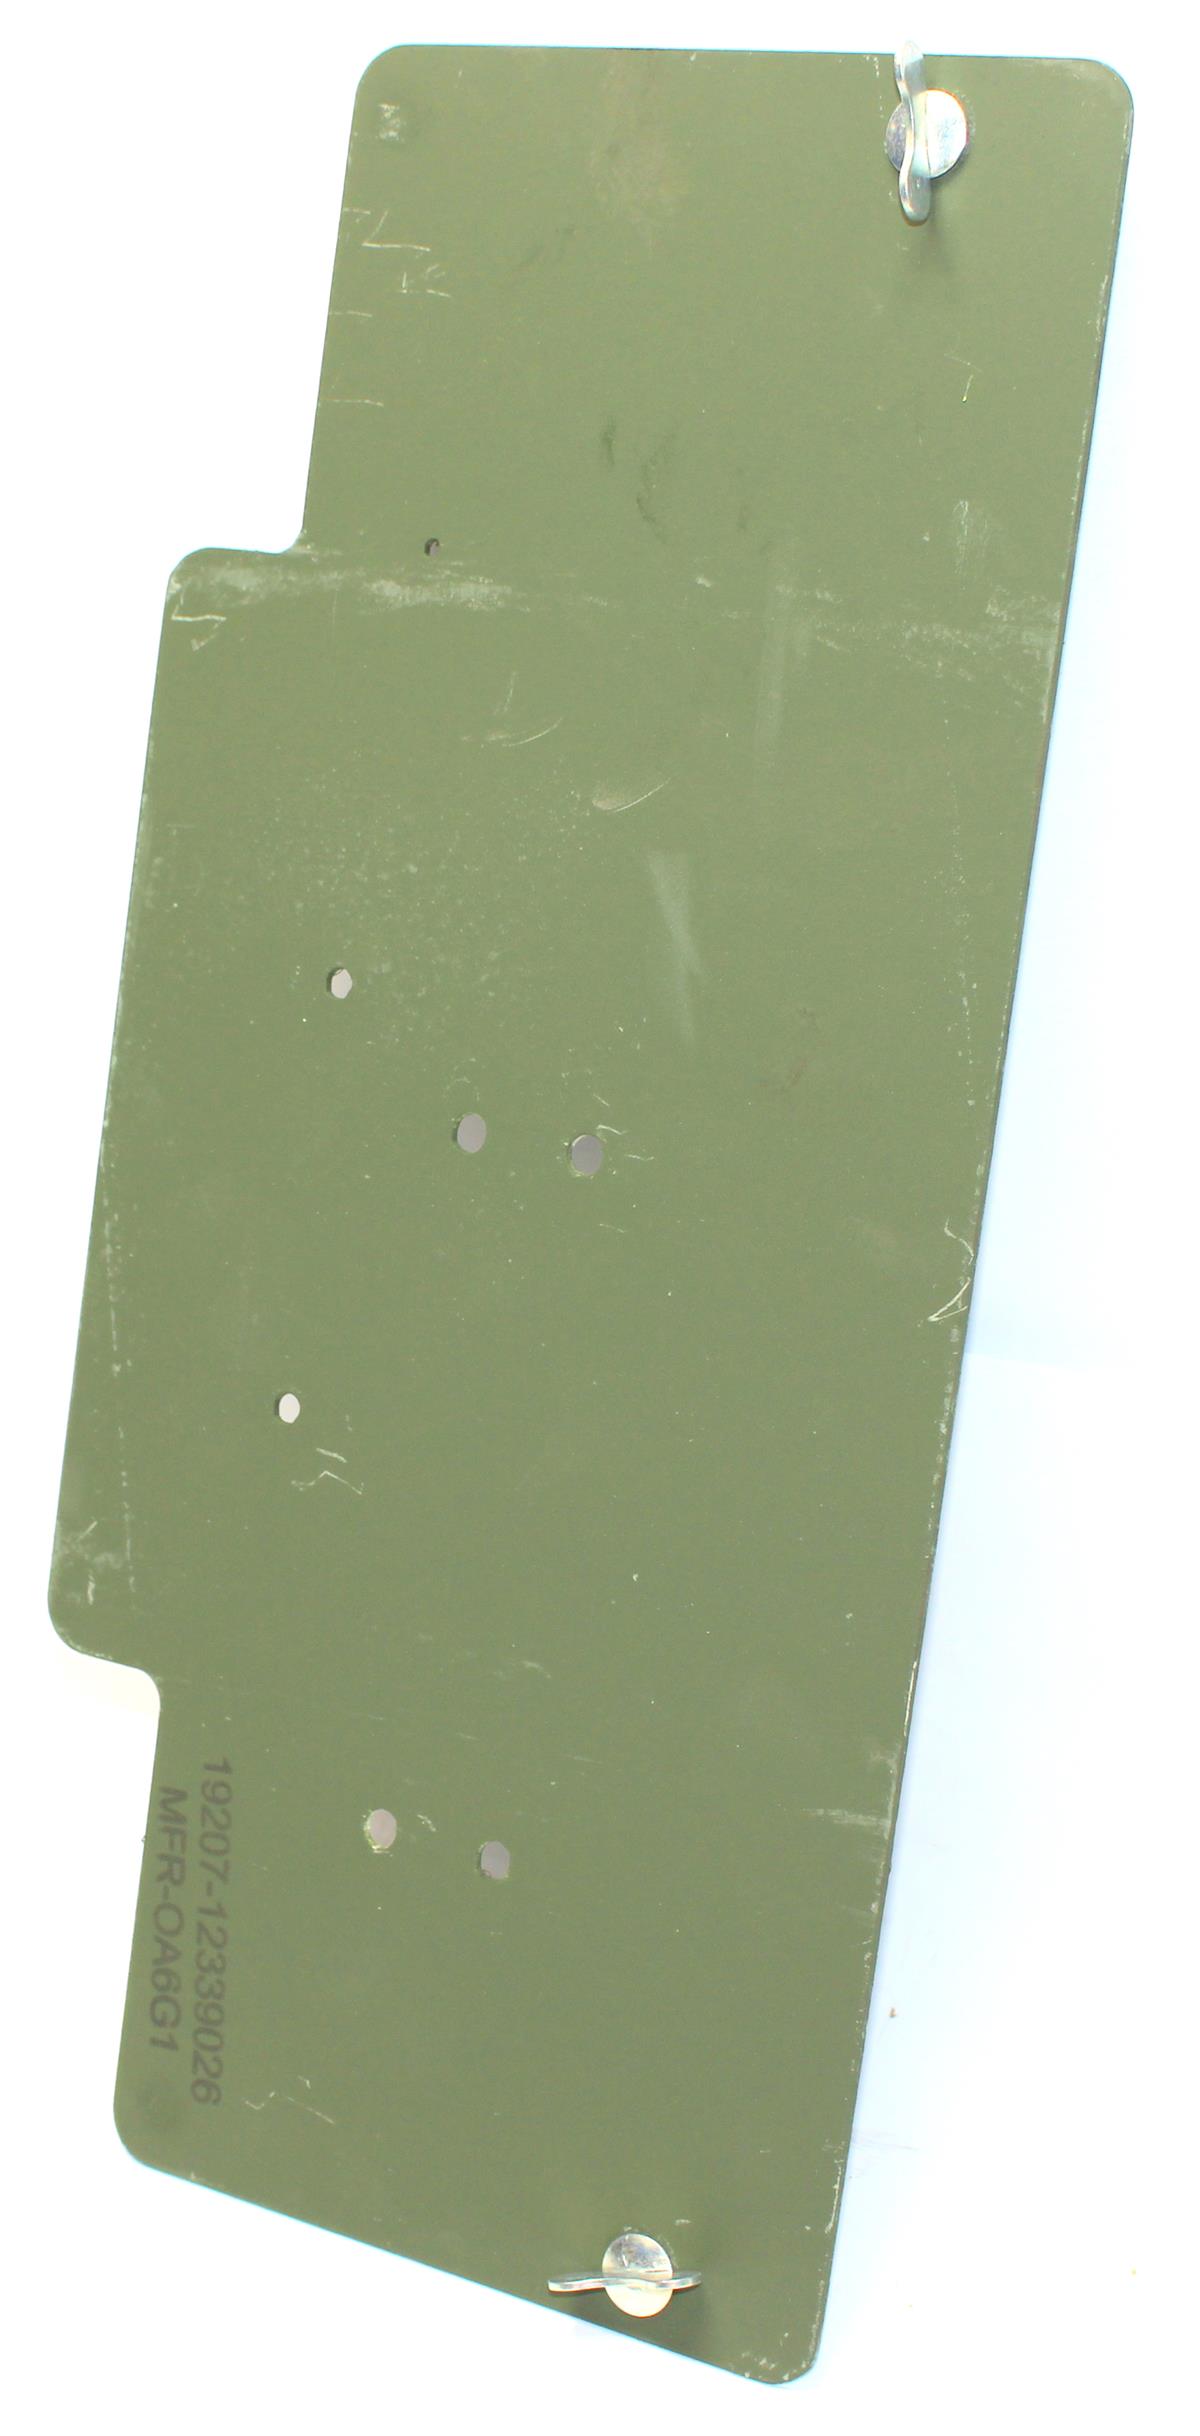 HM-859 | HM-859 Front Left Fire Extinguisher Mounting Plate HMMWV Update (12).JPG